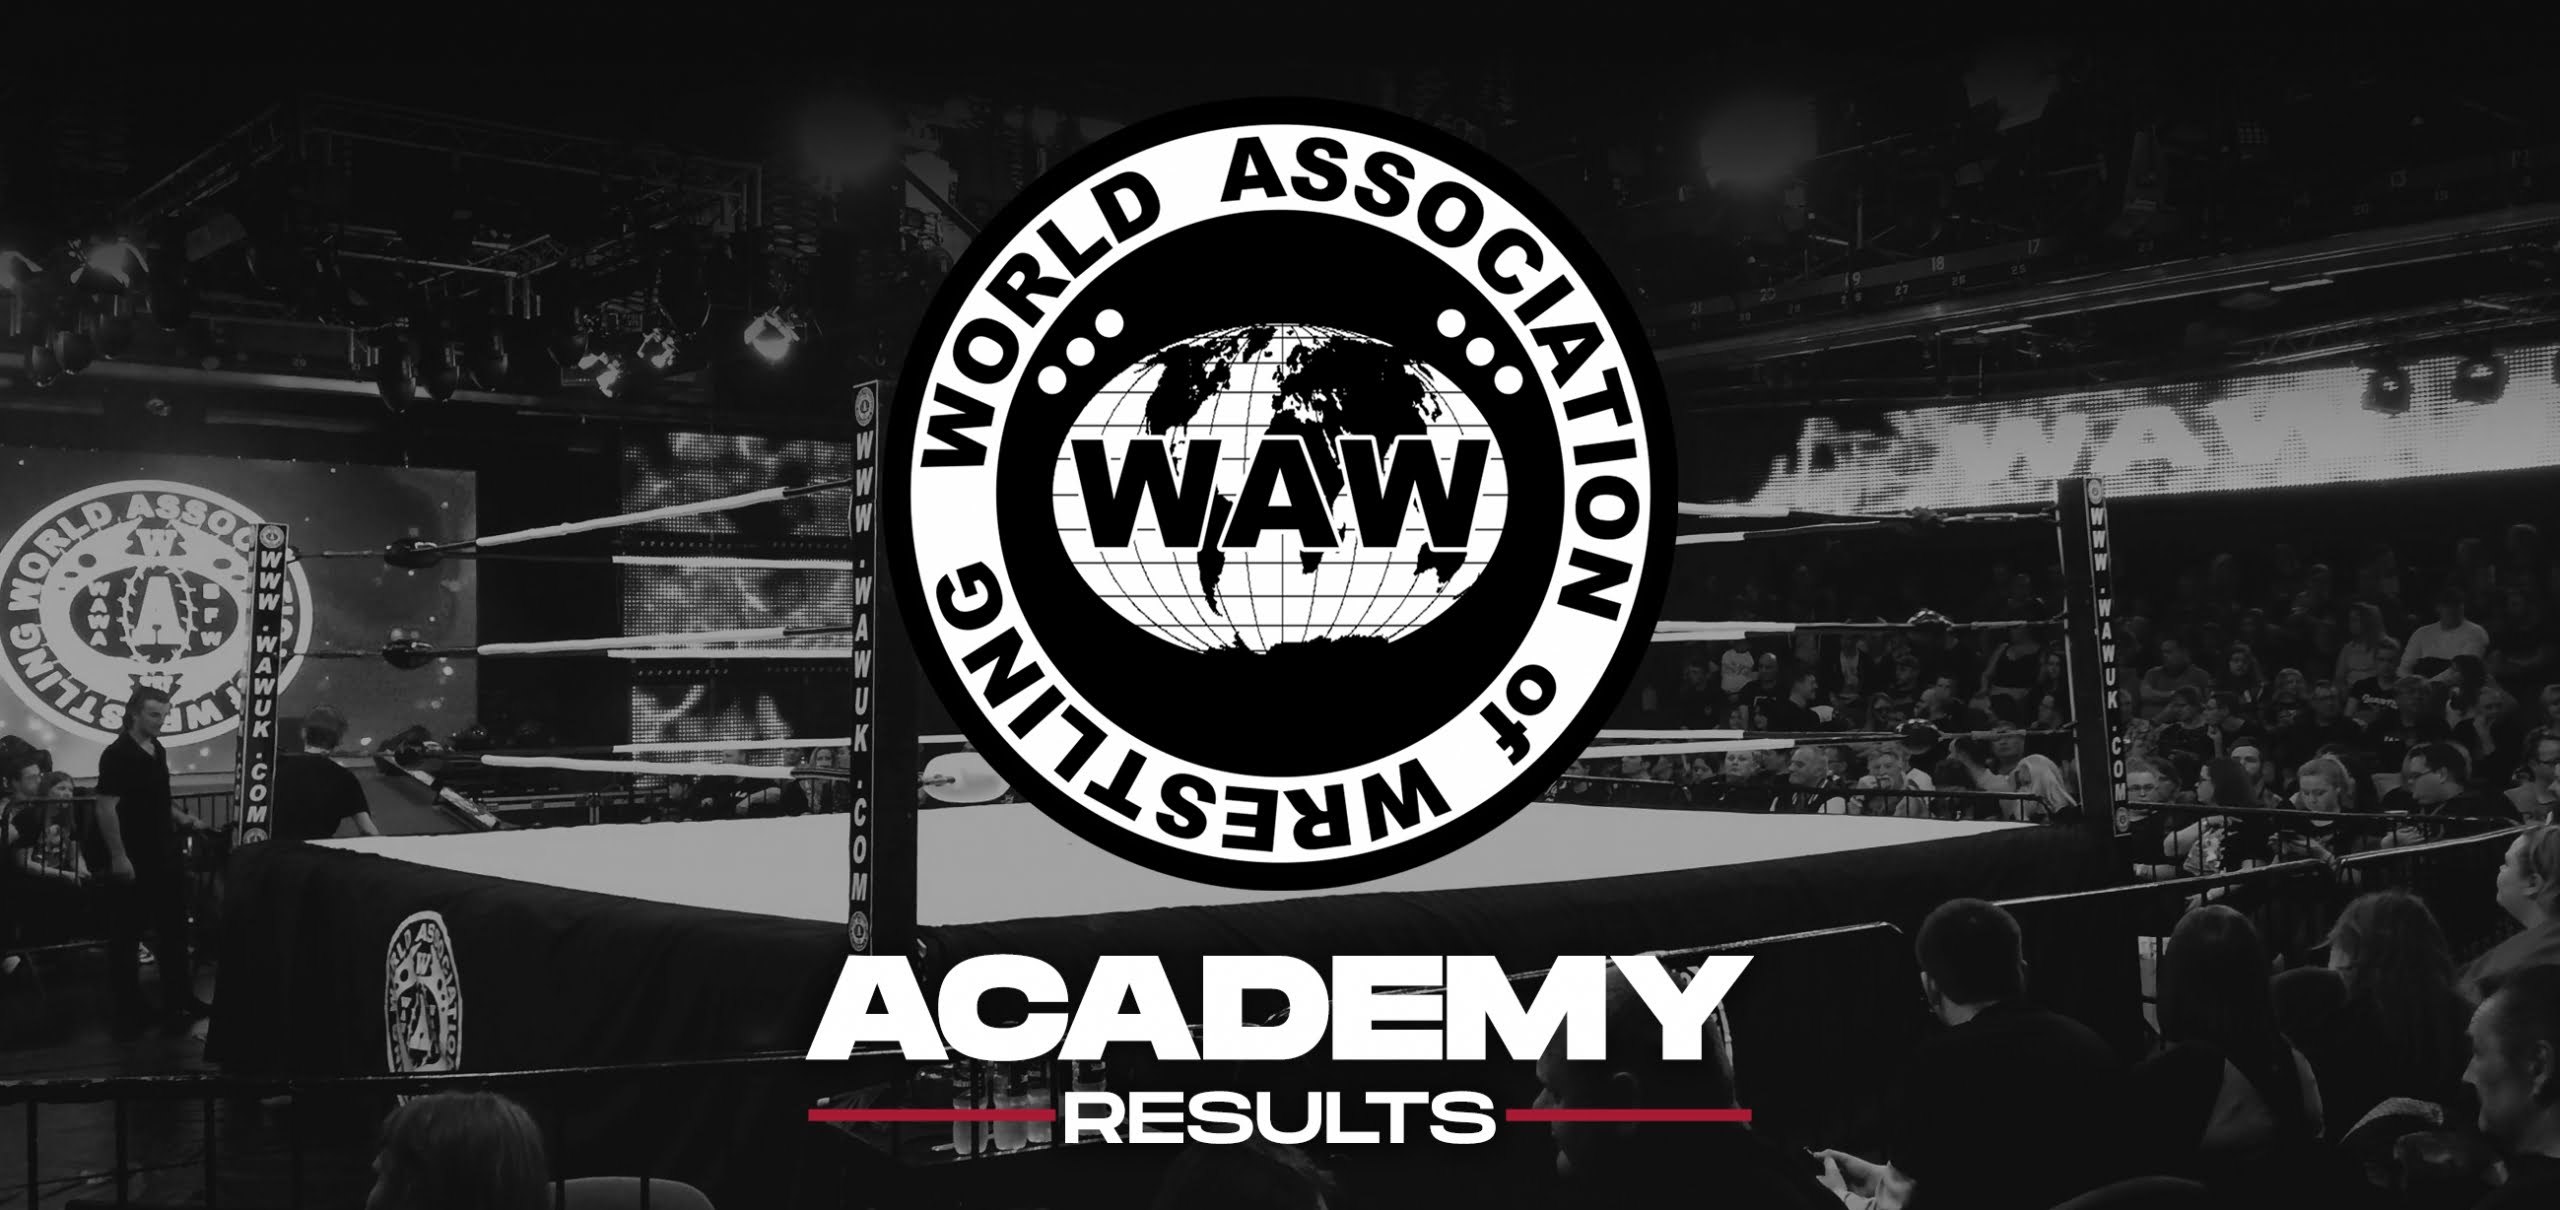 Academy Show Results 02/02/20